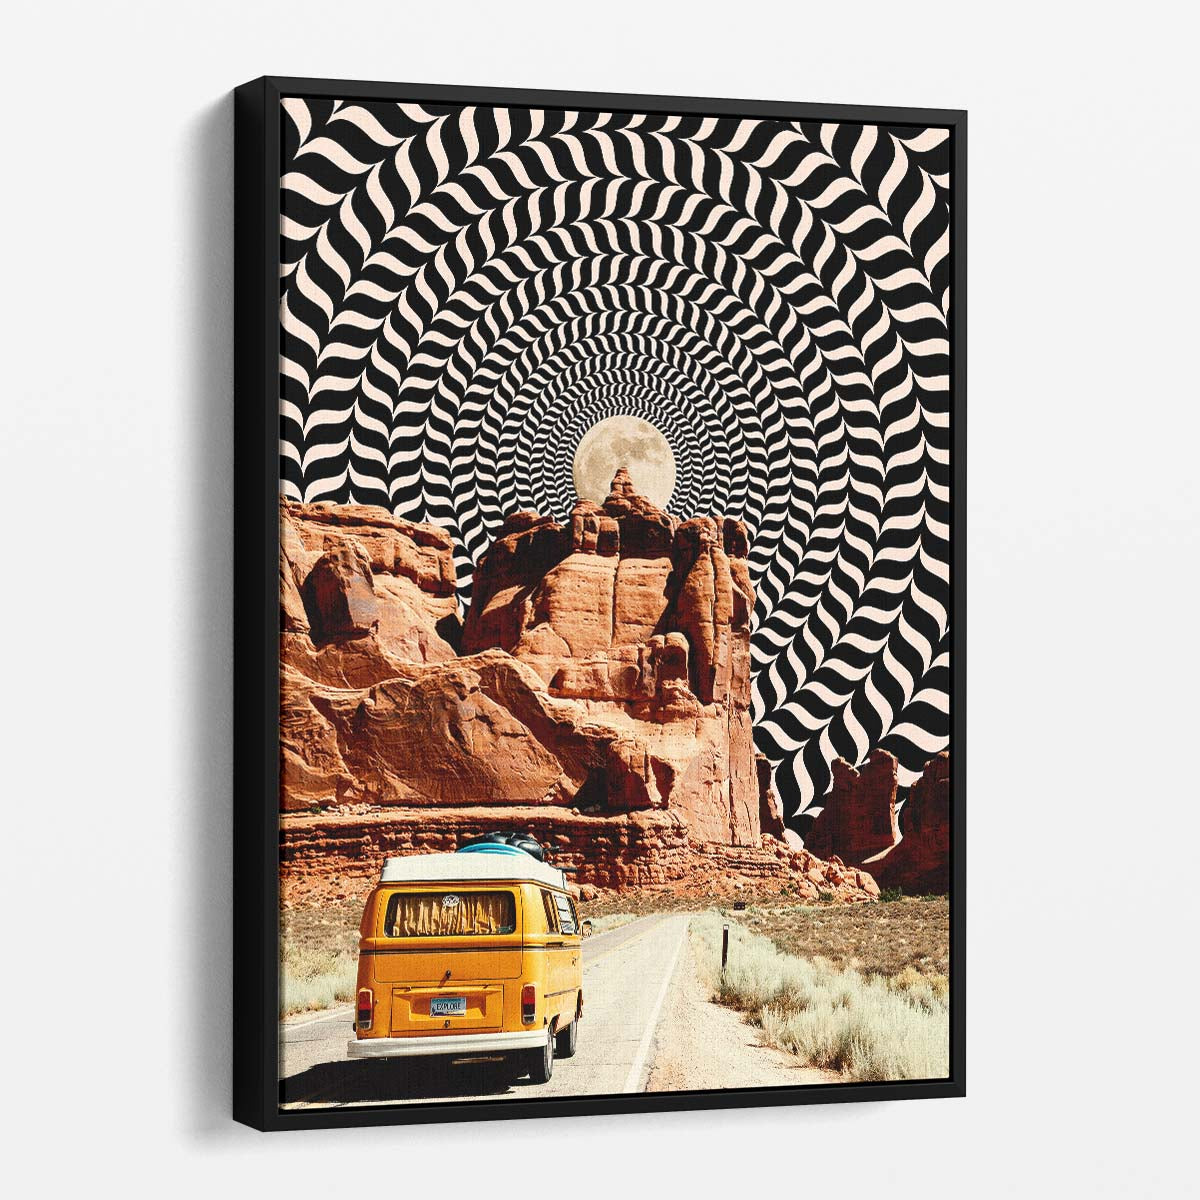 Vintage Surreal Moon Road Trip Collage Illustration Artwork by Luxuriance Designs, made in USA